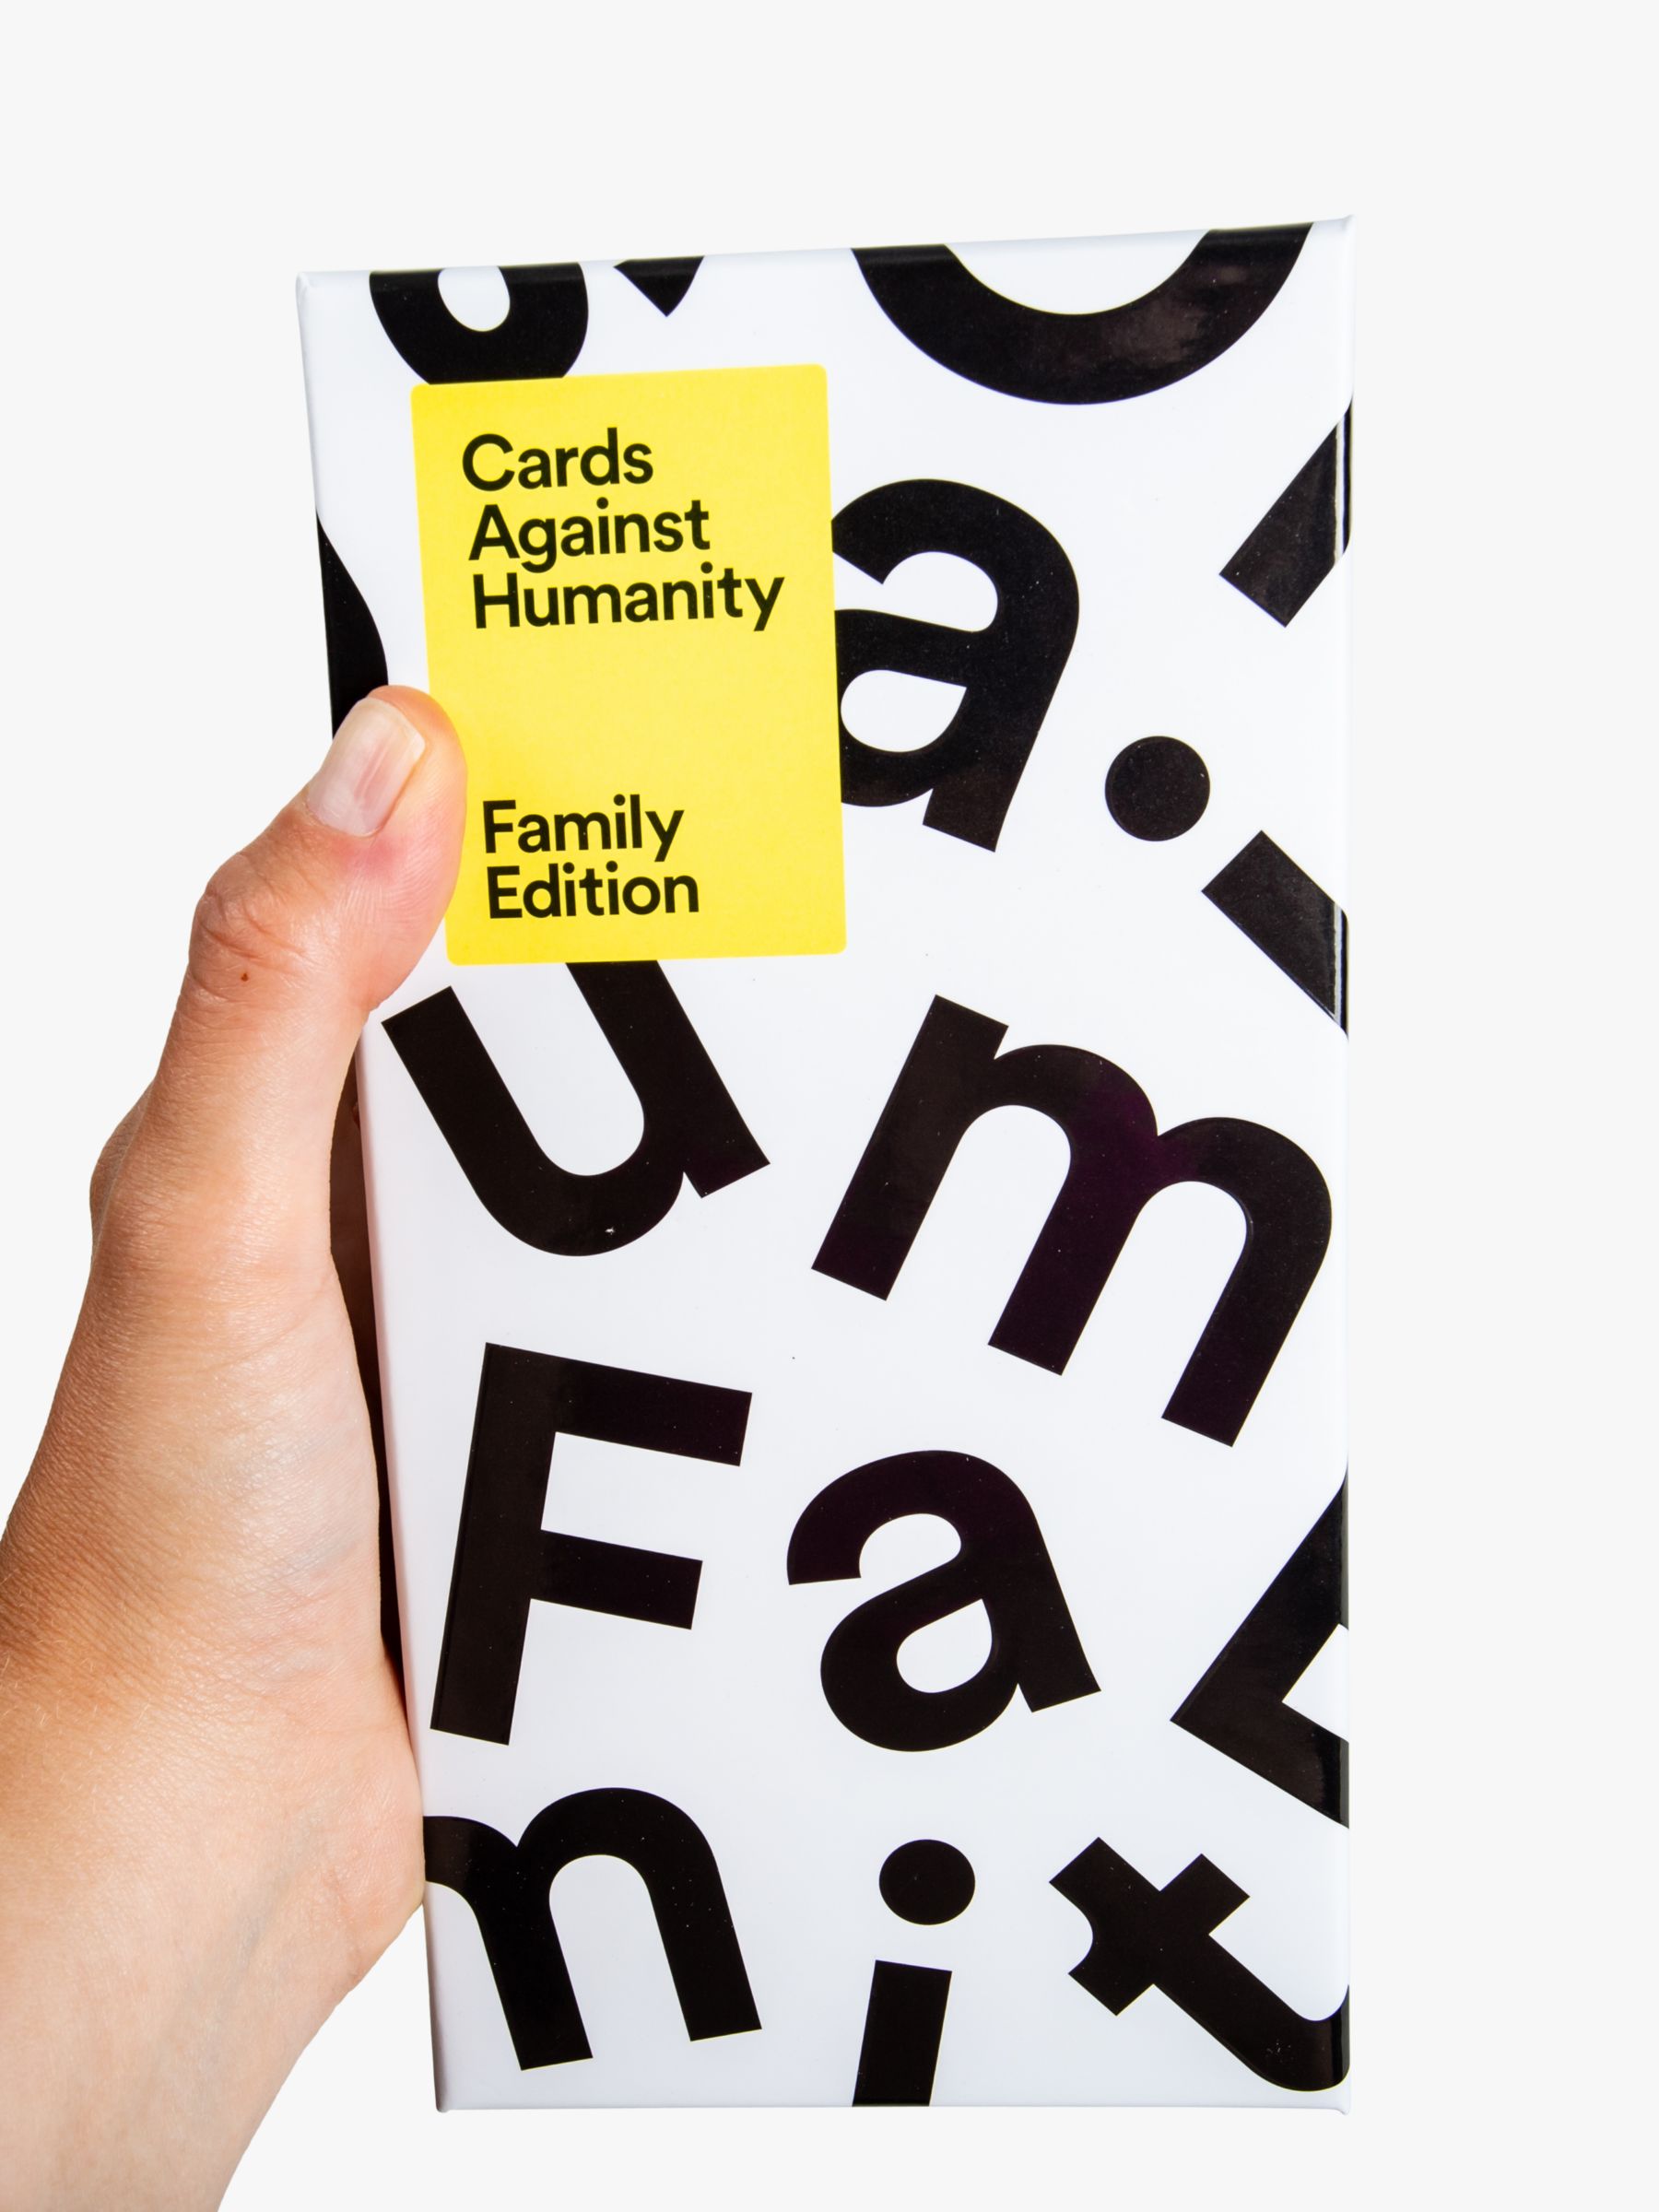 How to Play Cards Against Humanity: 13 Steps (with Pictures)